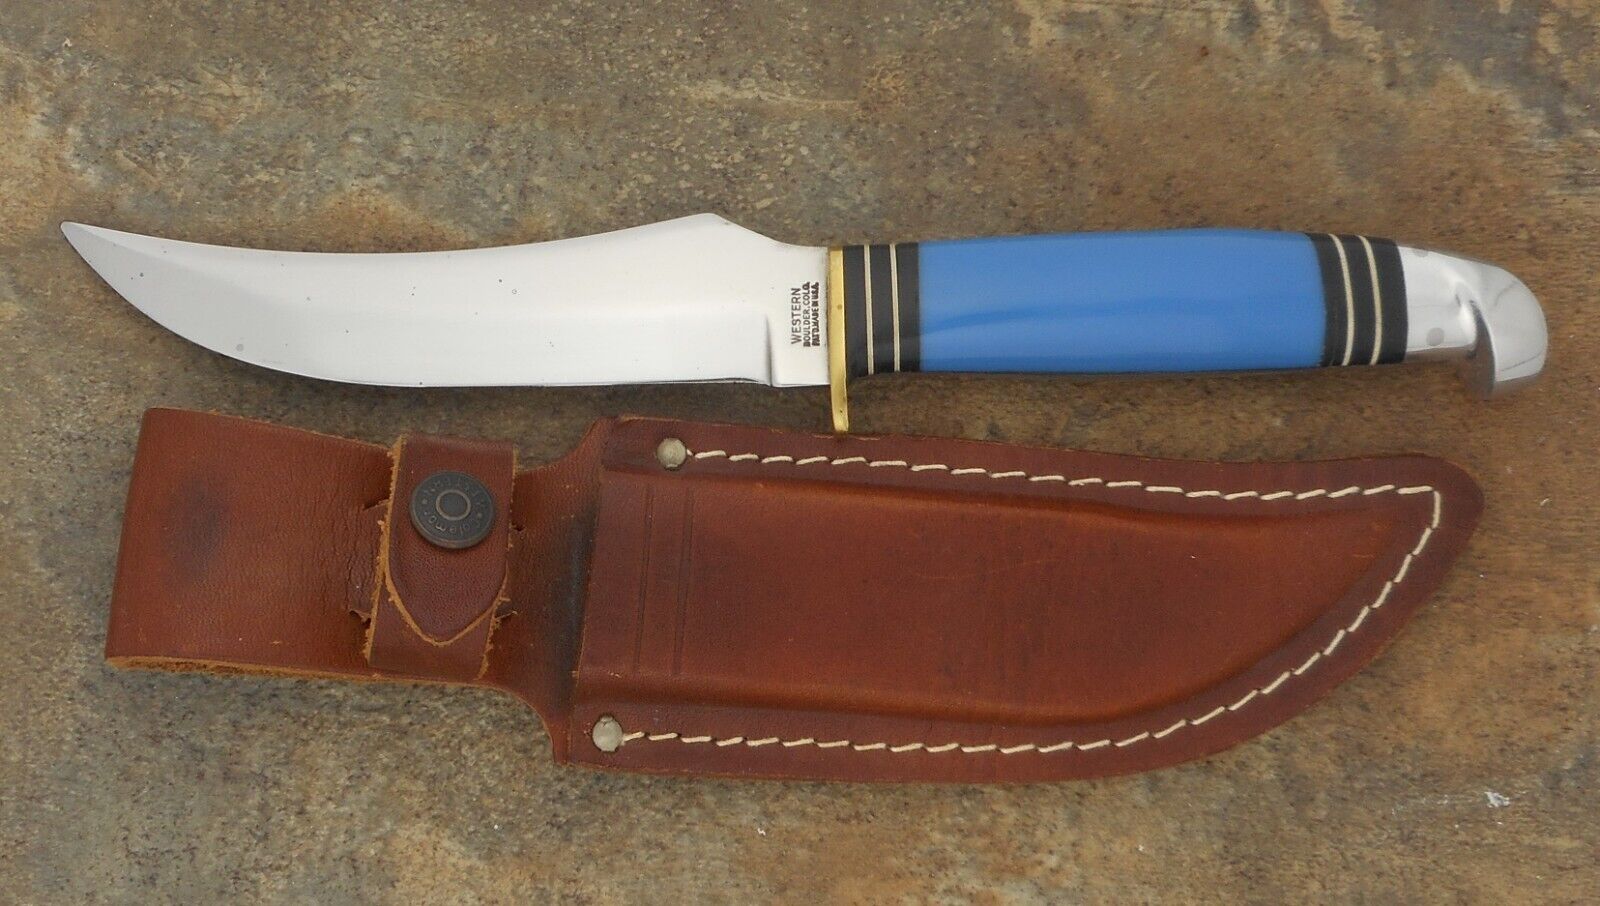 WESTERN BOULDER COLO. PAT\'D MADE IN U.S.A. 1931-50 BLUE HUNTING KNIFE